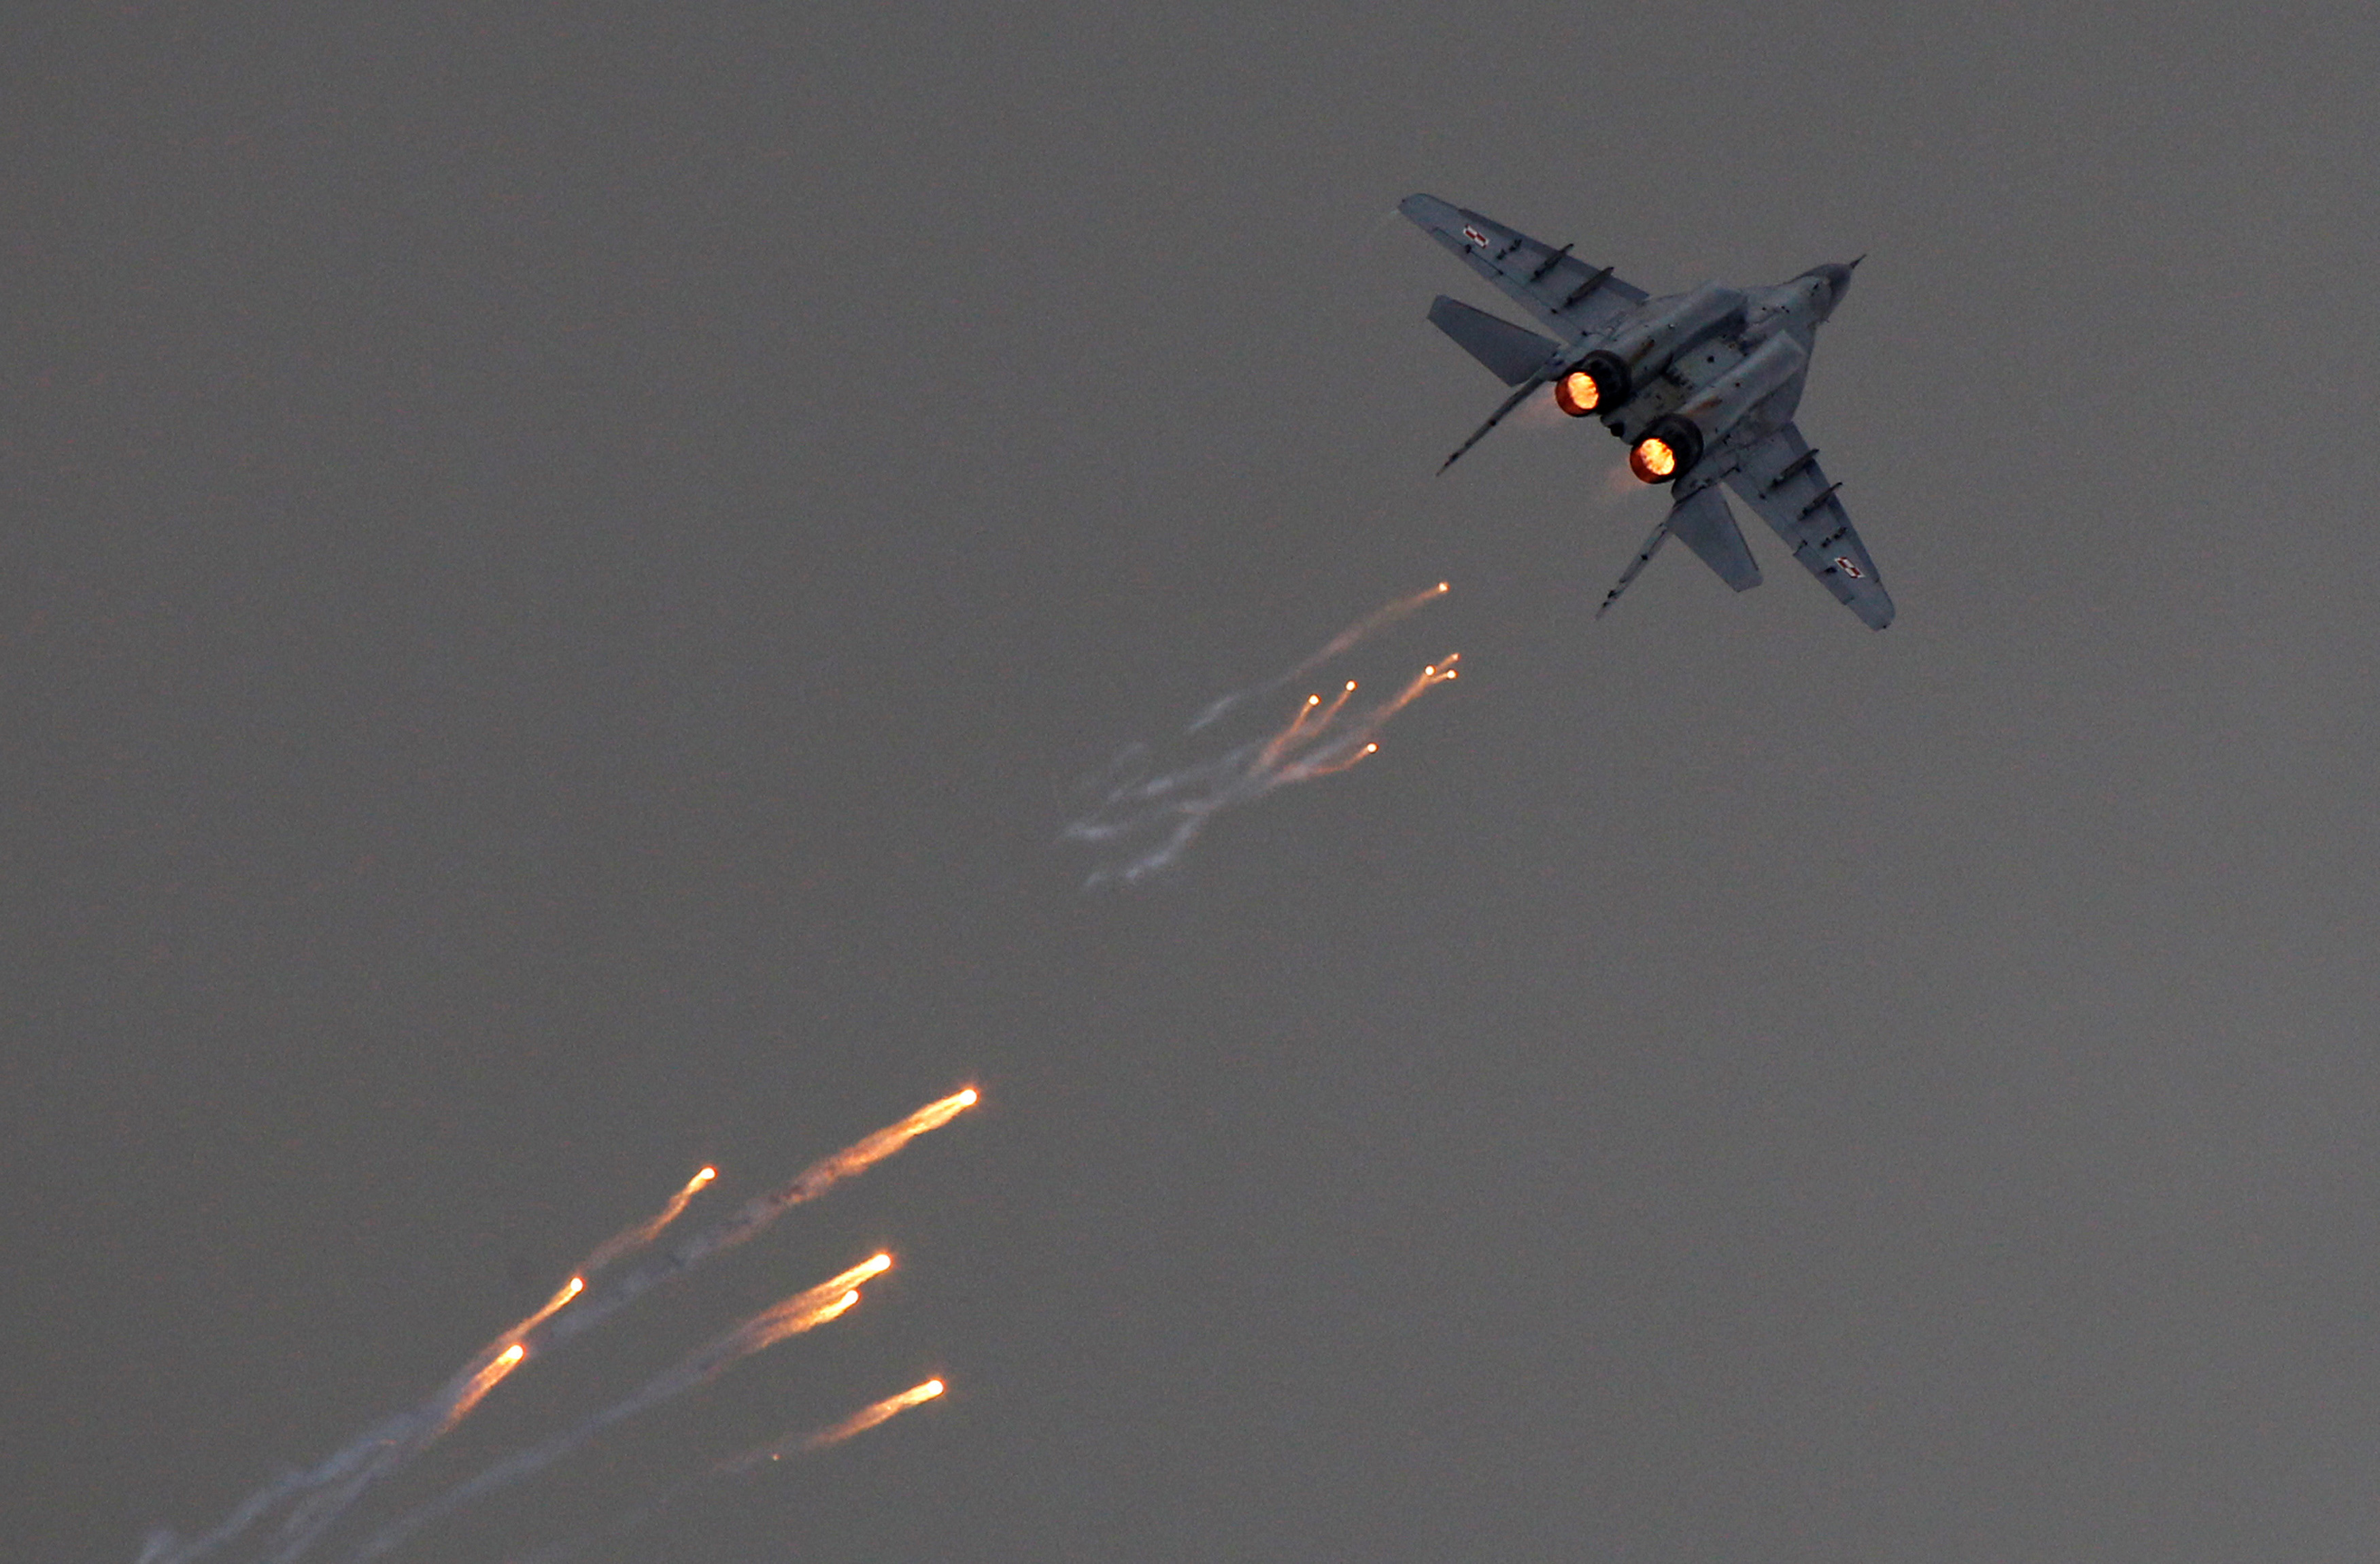 A Polish Air Force MiG-29 aircraft fires flares during a performance at the Radom Air Show at an airport in Radom